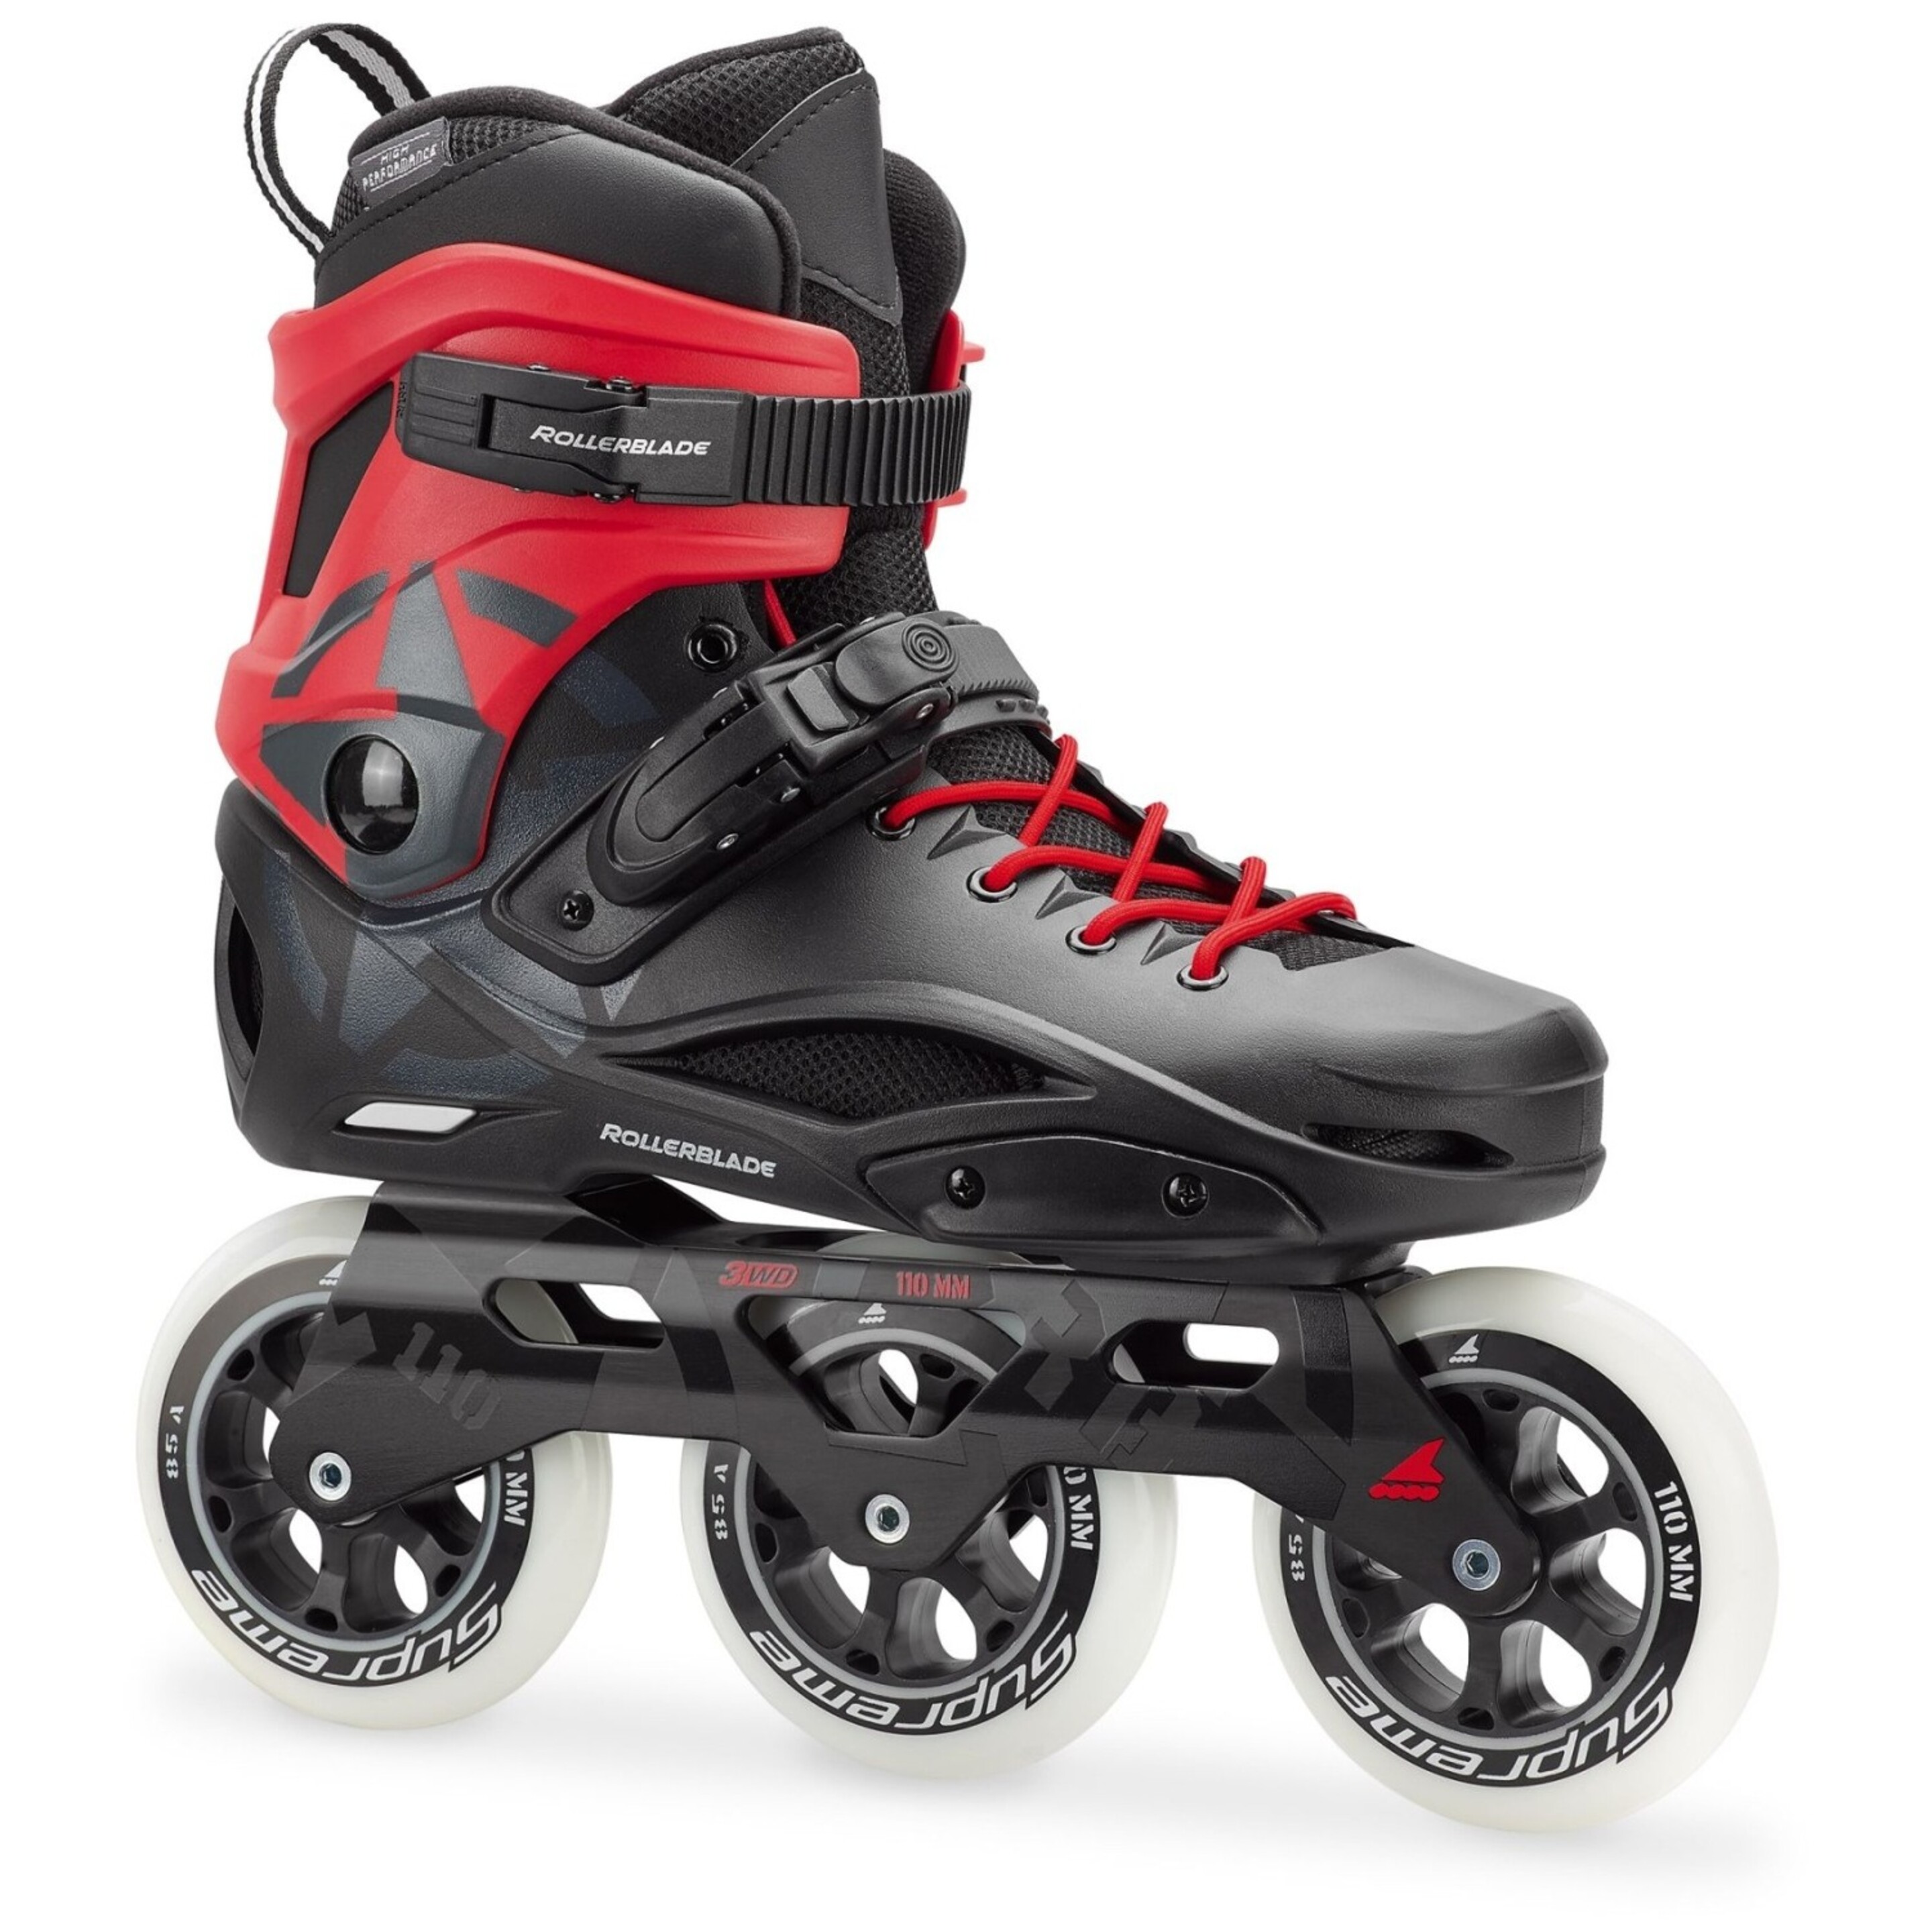 Patines Rb 110 3wd Rollerblade